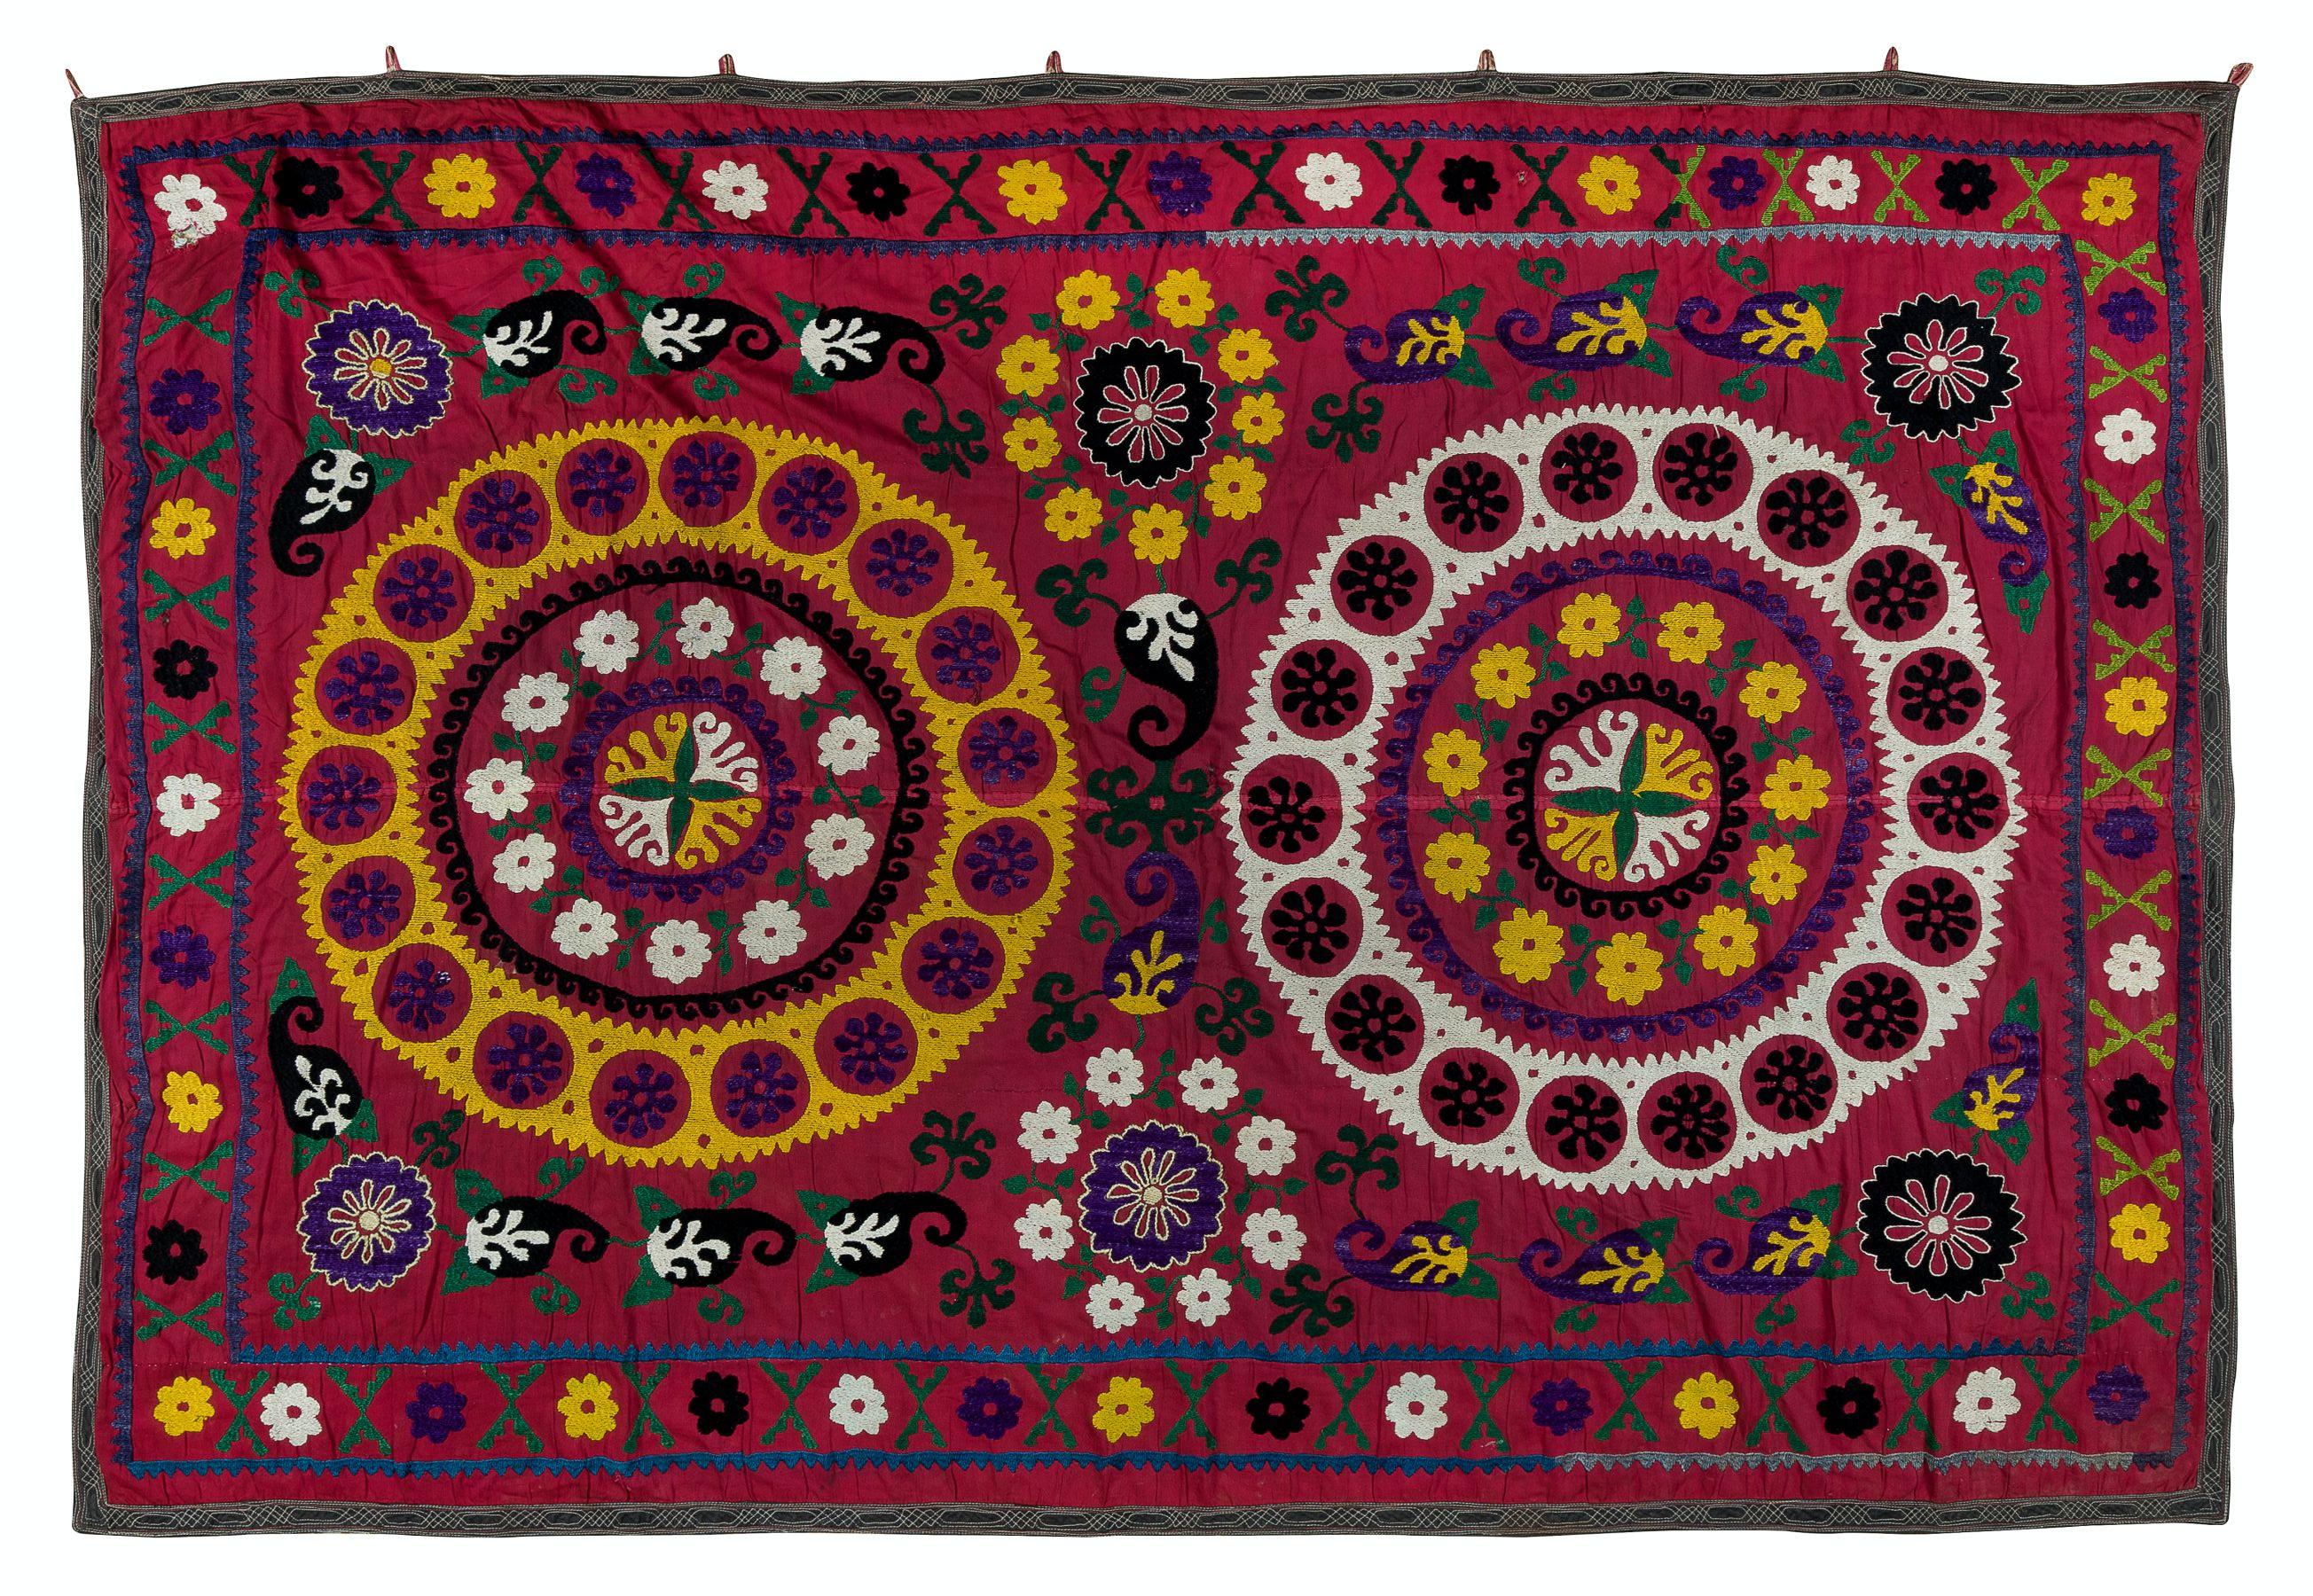 20th Century Silk Hand Embroidery Throw, Vintage Suzani Tapestry, Uzbek Wall Hanging For Sale